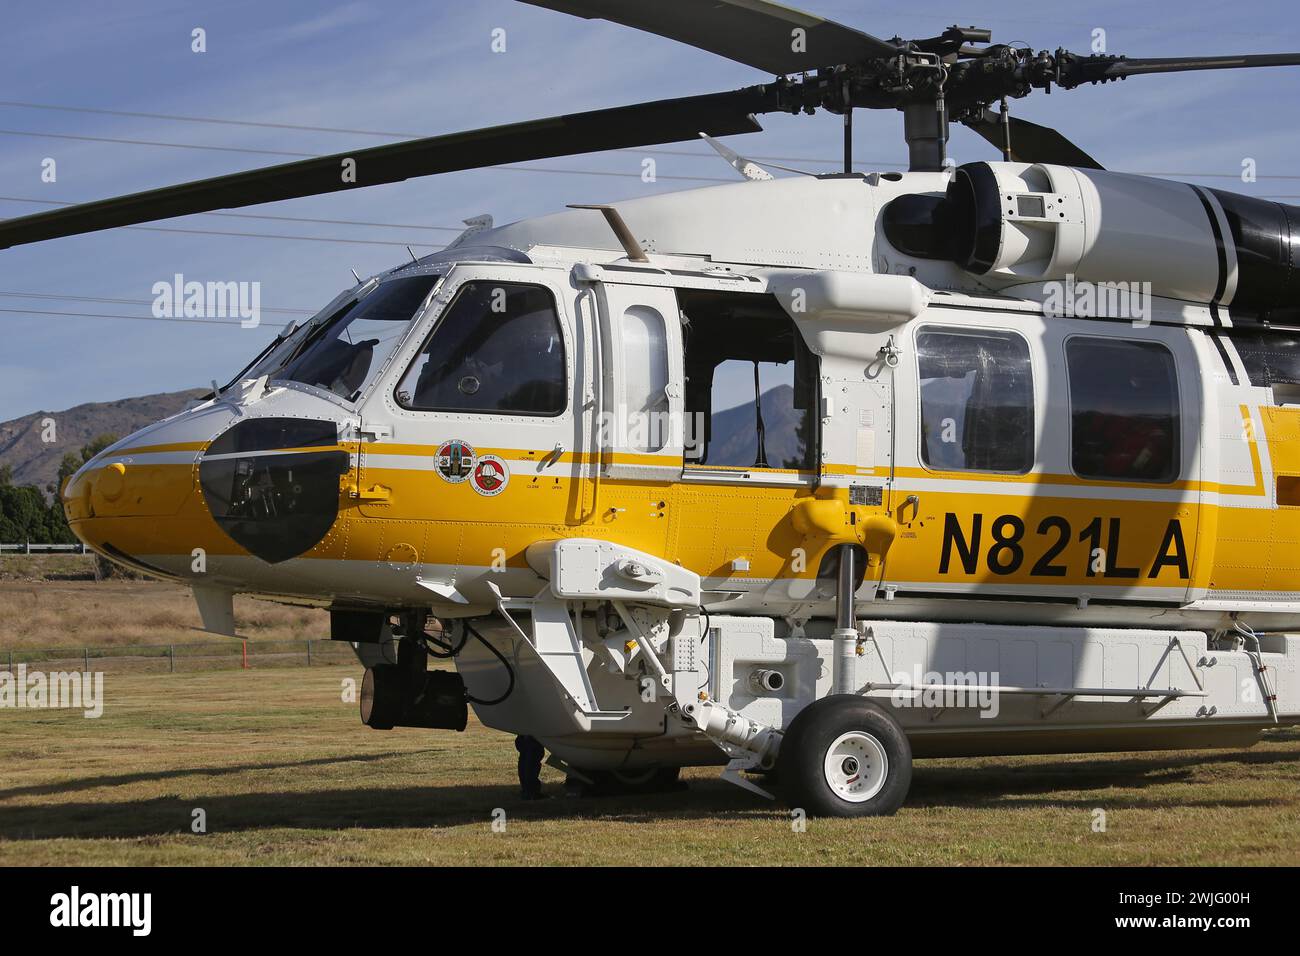 Los Angeles, California, USA - Nov. 4, 2023: A Sikorsky S-70 Firehawk helicopter (N821LA), operated by the L.A. County Fire Department, is shown. Stock Photo